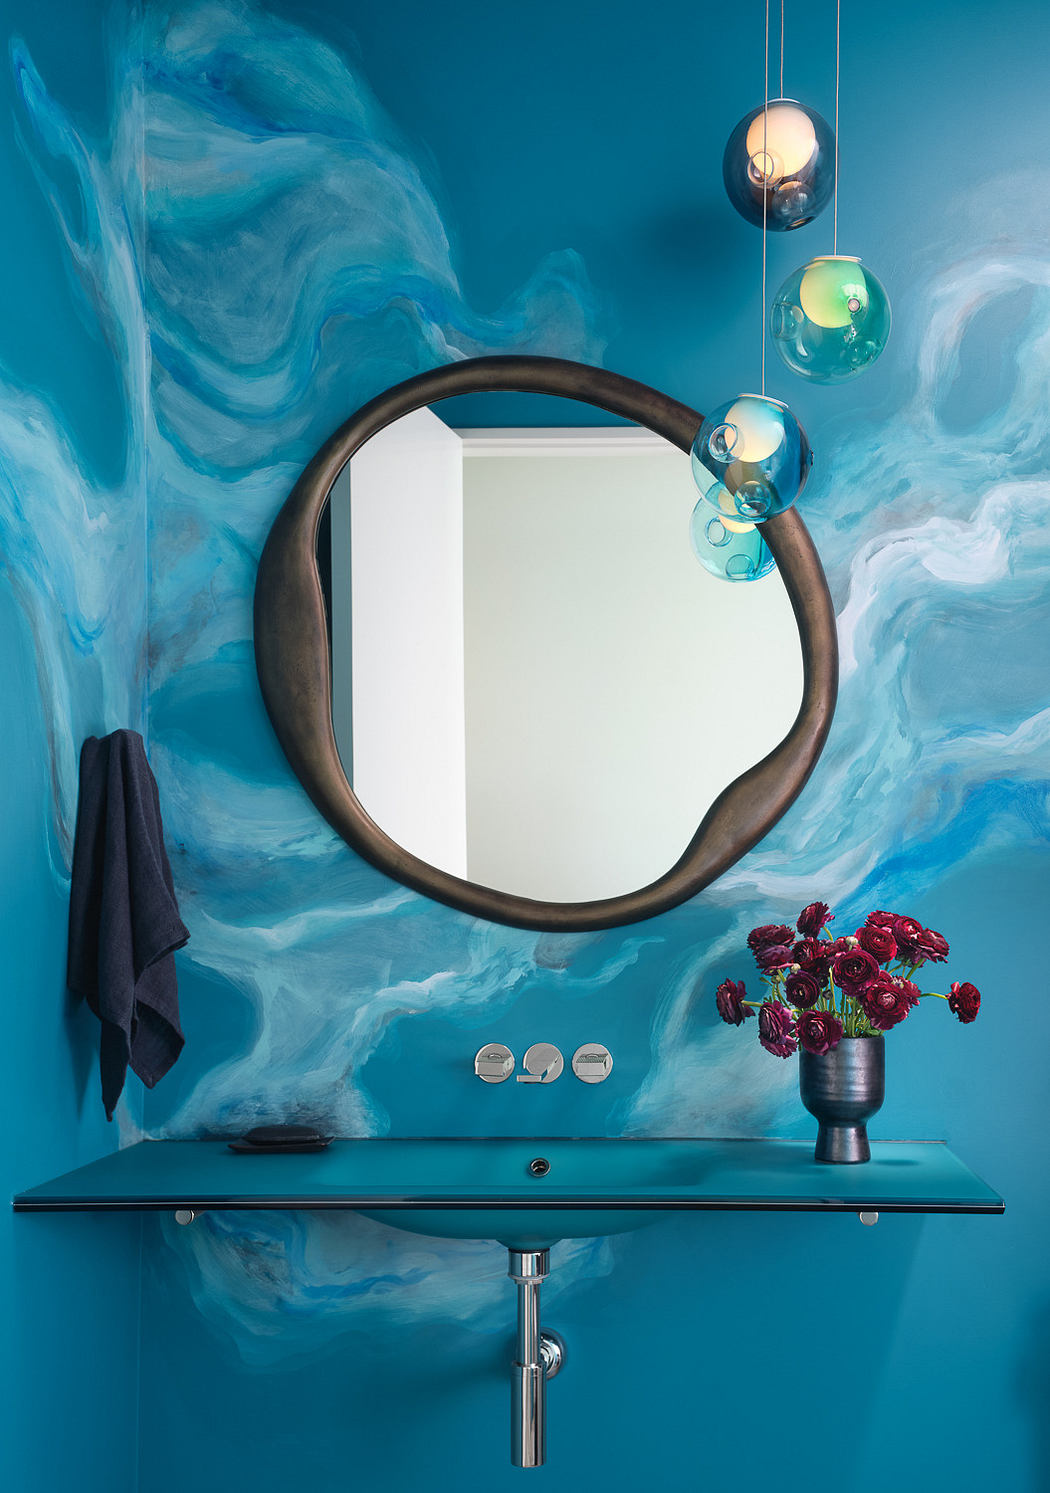 Modern bathroom with blue swirling wall pattern, round mirror, and decorative lights.